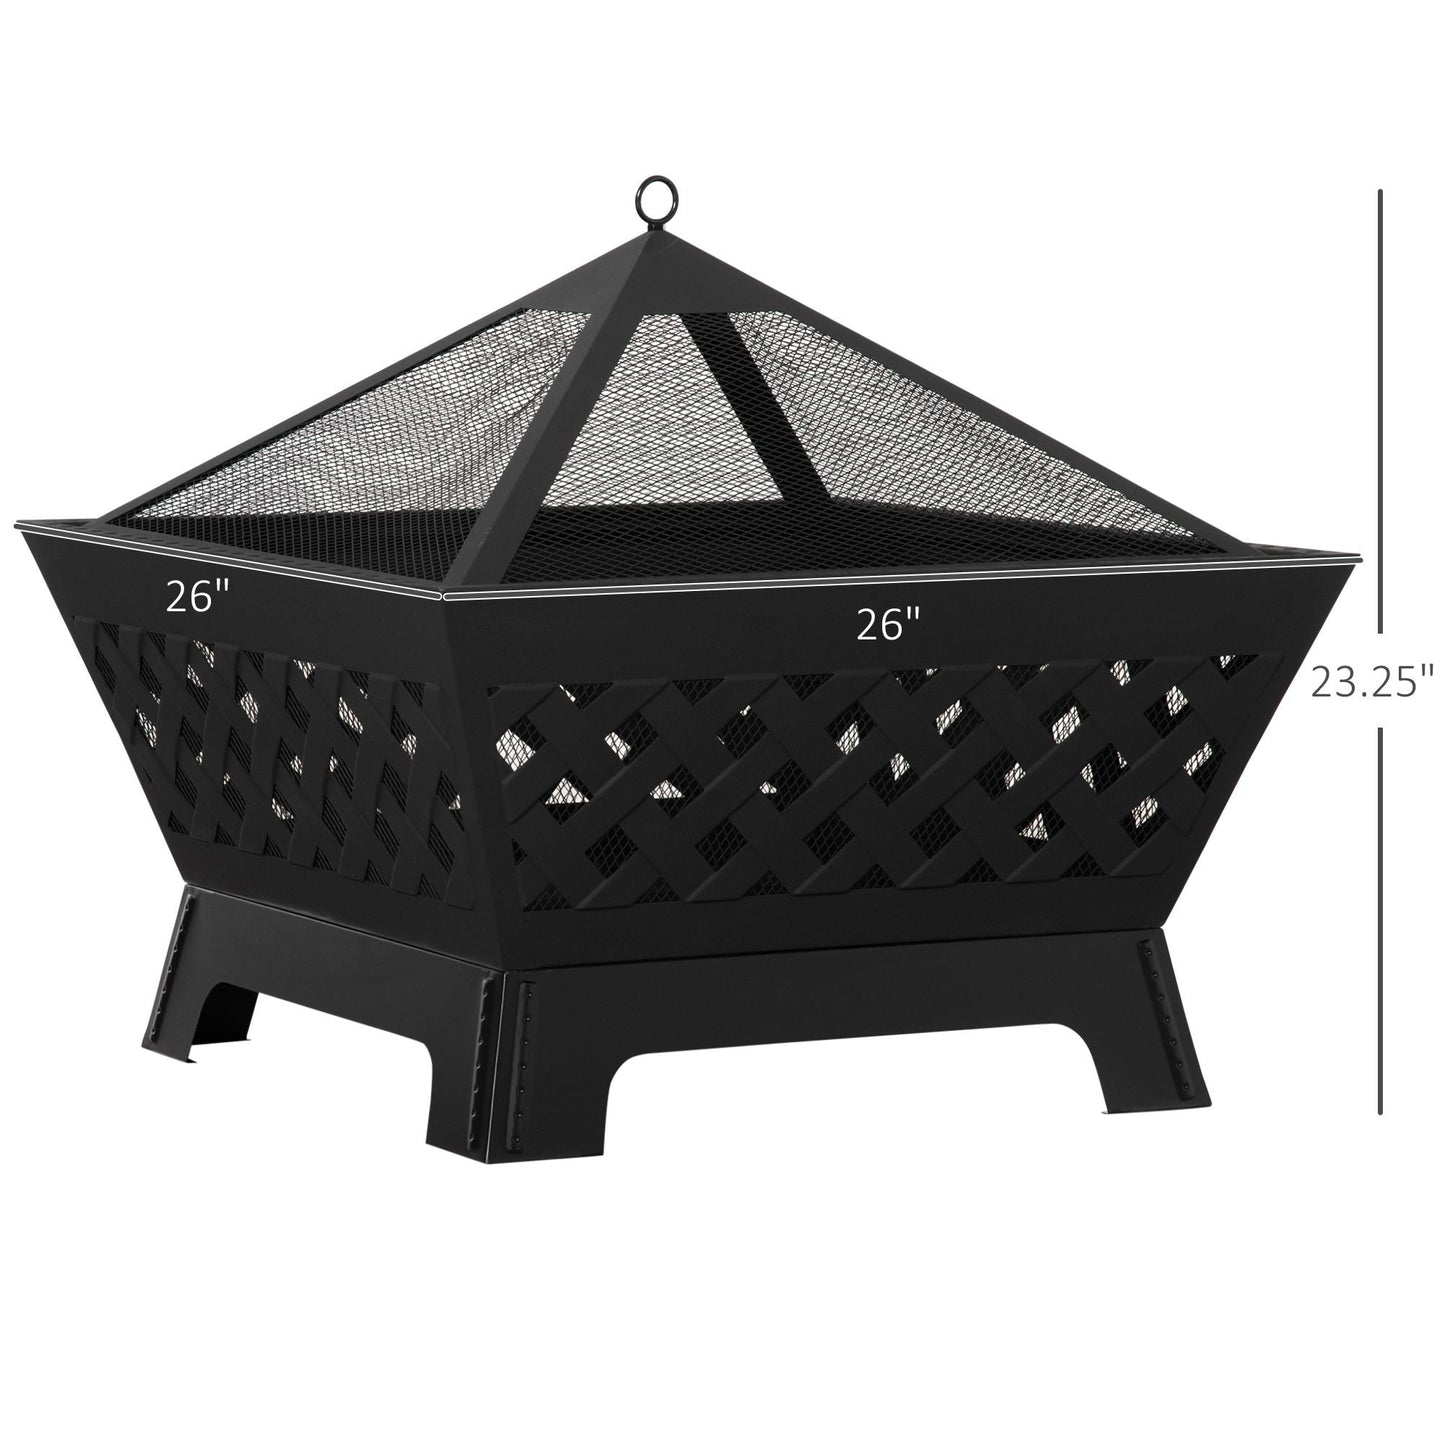 Outdoor and Garden-26 Inch Outdoor Fire Pit ,Square Steel Fire pit with Spark Screen, Log Burning Bowl with Poker for Patio, Backyard - Outdoor Style Company